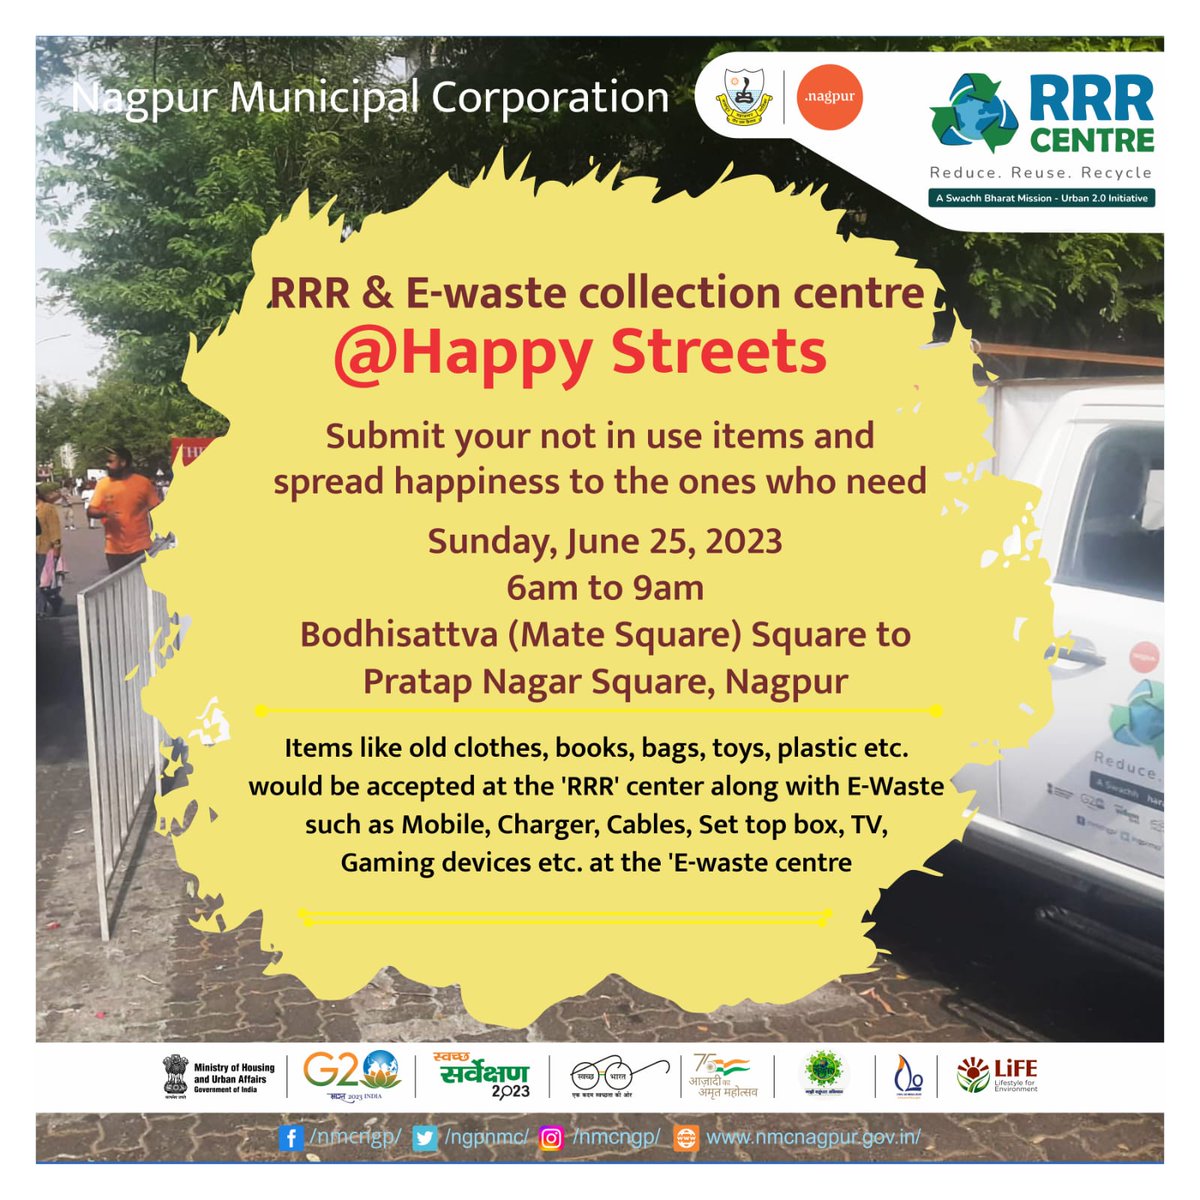 #RRR & #Ewaste collection centre at #Happy_StreetsSubmit your not in use items and spread happiness to the ones who need.

#reuse #Recycle #reduce #MeriLiFE #RRR4LiFE #ChooseLiFE #IndiaVsGarbage #MeraSwachhShehar #nmc #nagpur #nagpurcity #माझीवसुंधरा